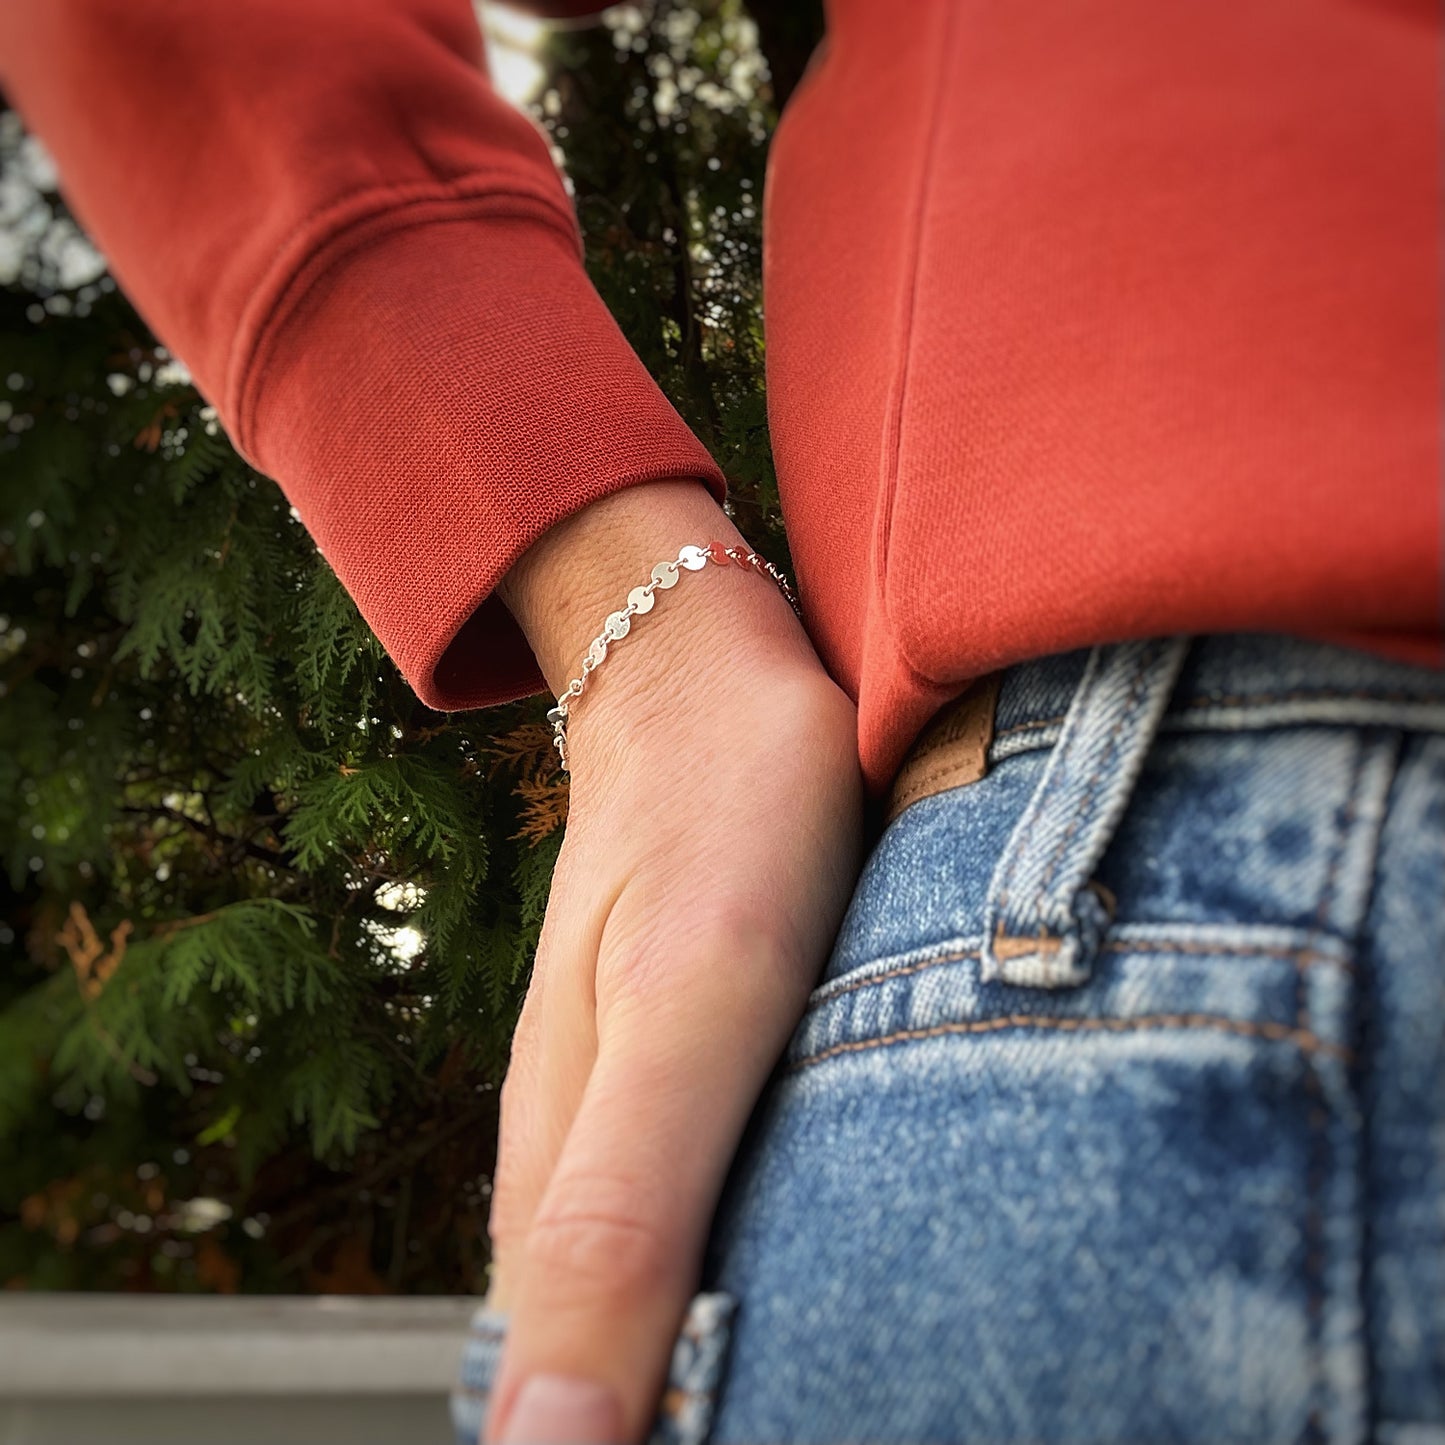 sterling silver coin chain bracelet on a person with a red sweatshirt and blue jeans